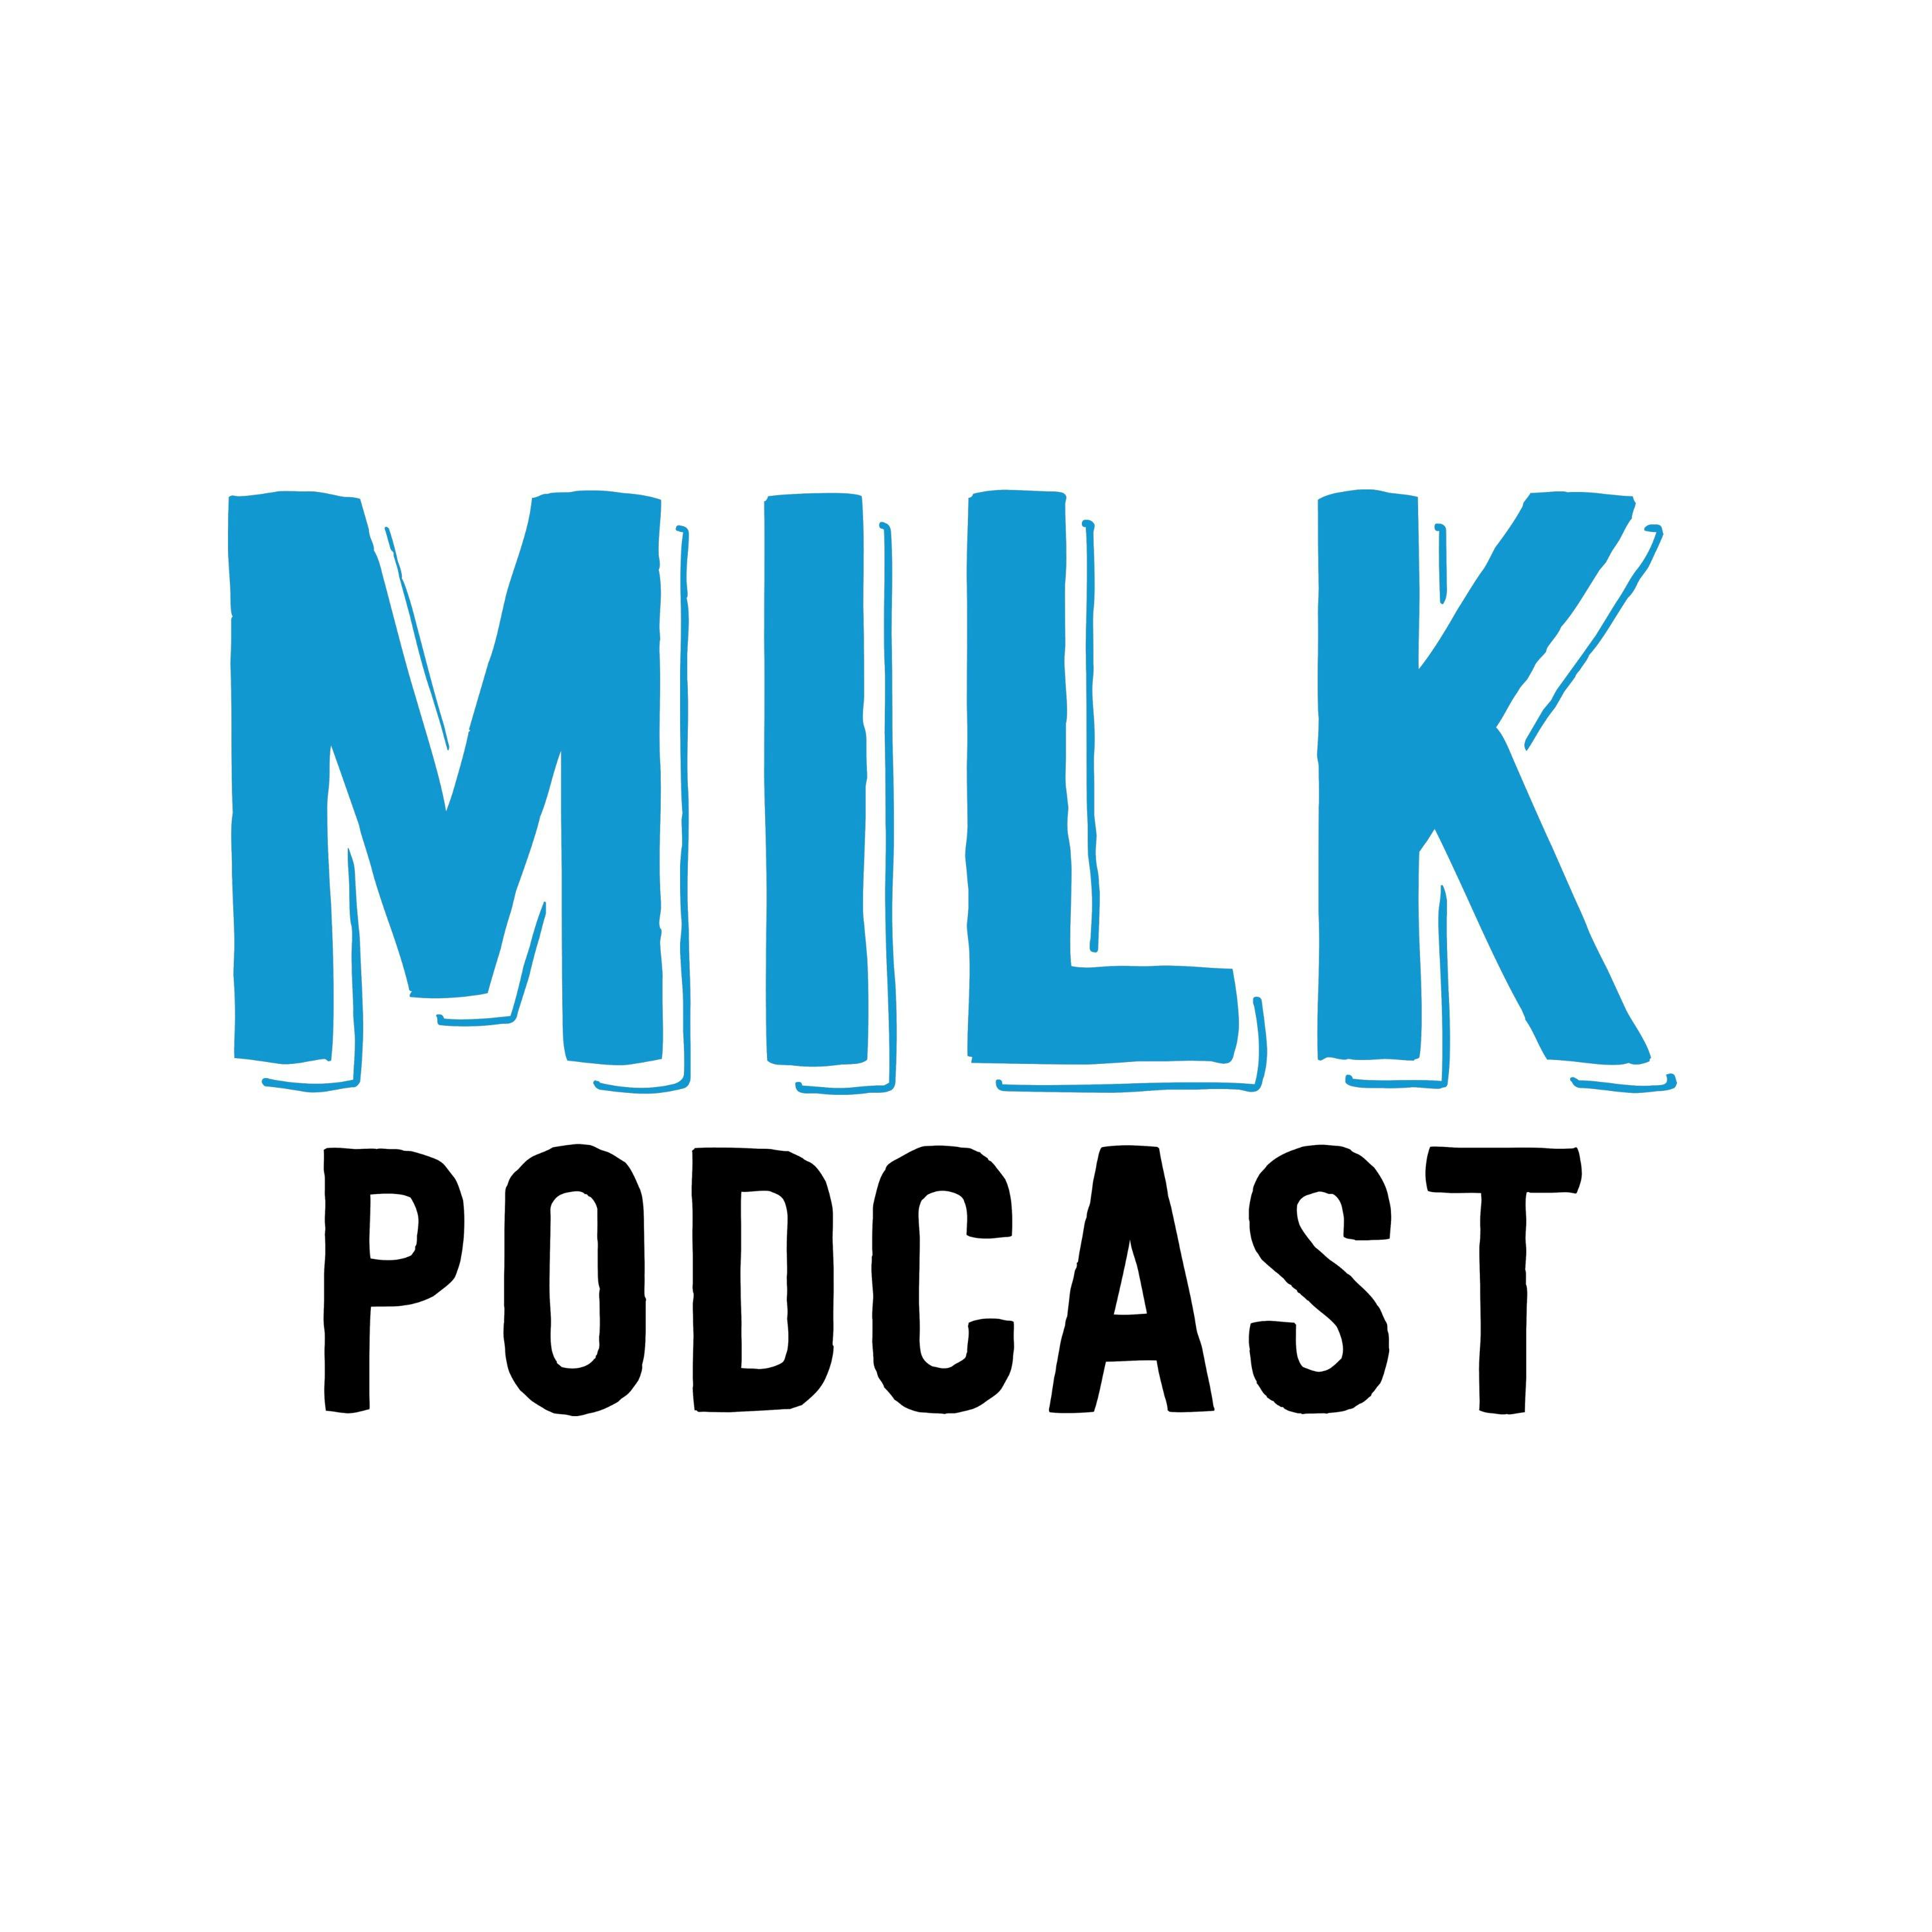 MILK Podcast: The Loss Season, Episode 9: Frogs with Feelings, Dealing with Divorce, Blending Families and Other Transitions with Children’s Book Author Nadine Haruni